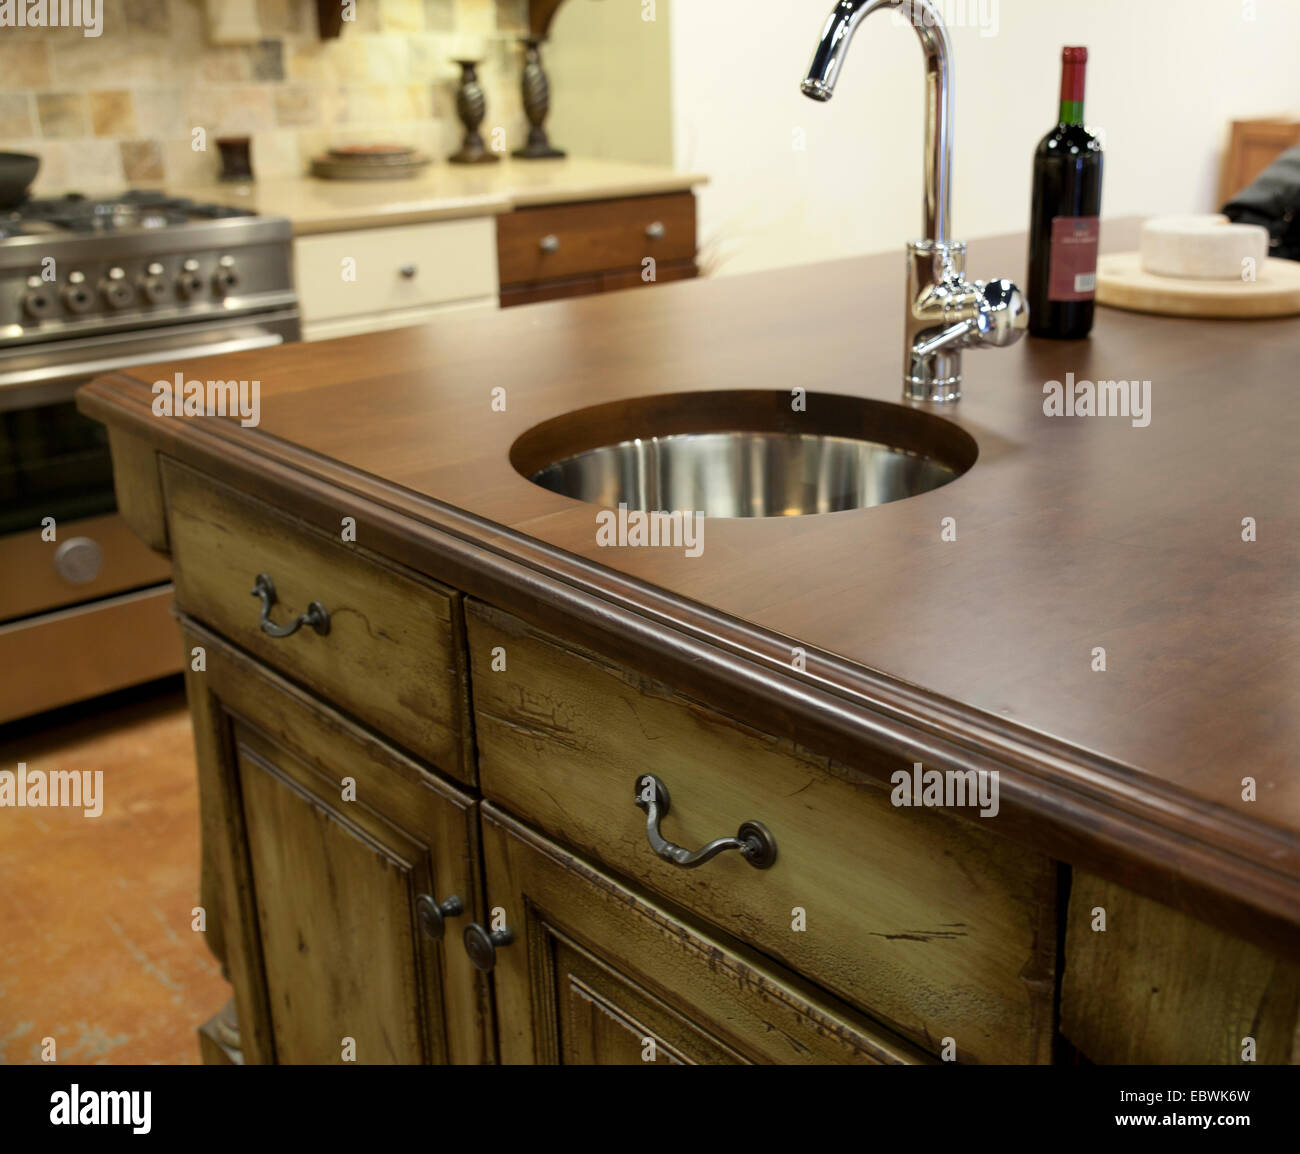 Distressed kitchen cabinets, wooden countertop with modern stainless steel faucet and sink. Stock Photo